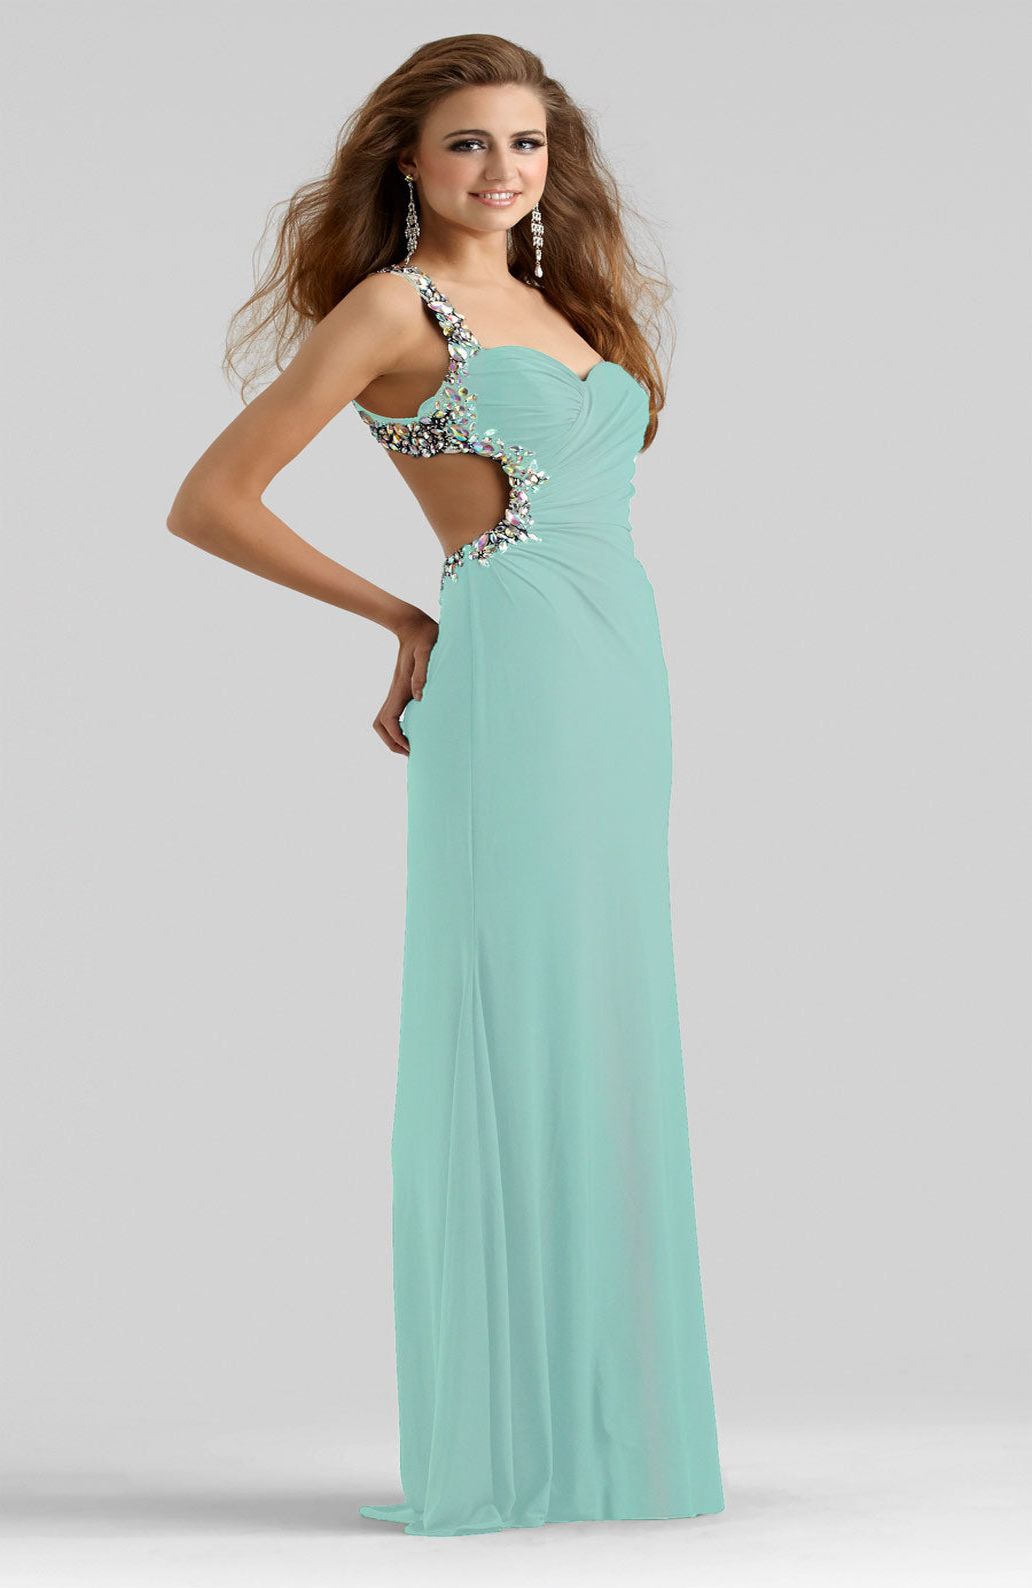 Clarisse -2364 Beaded One Shoulder Jersey Prom Dress